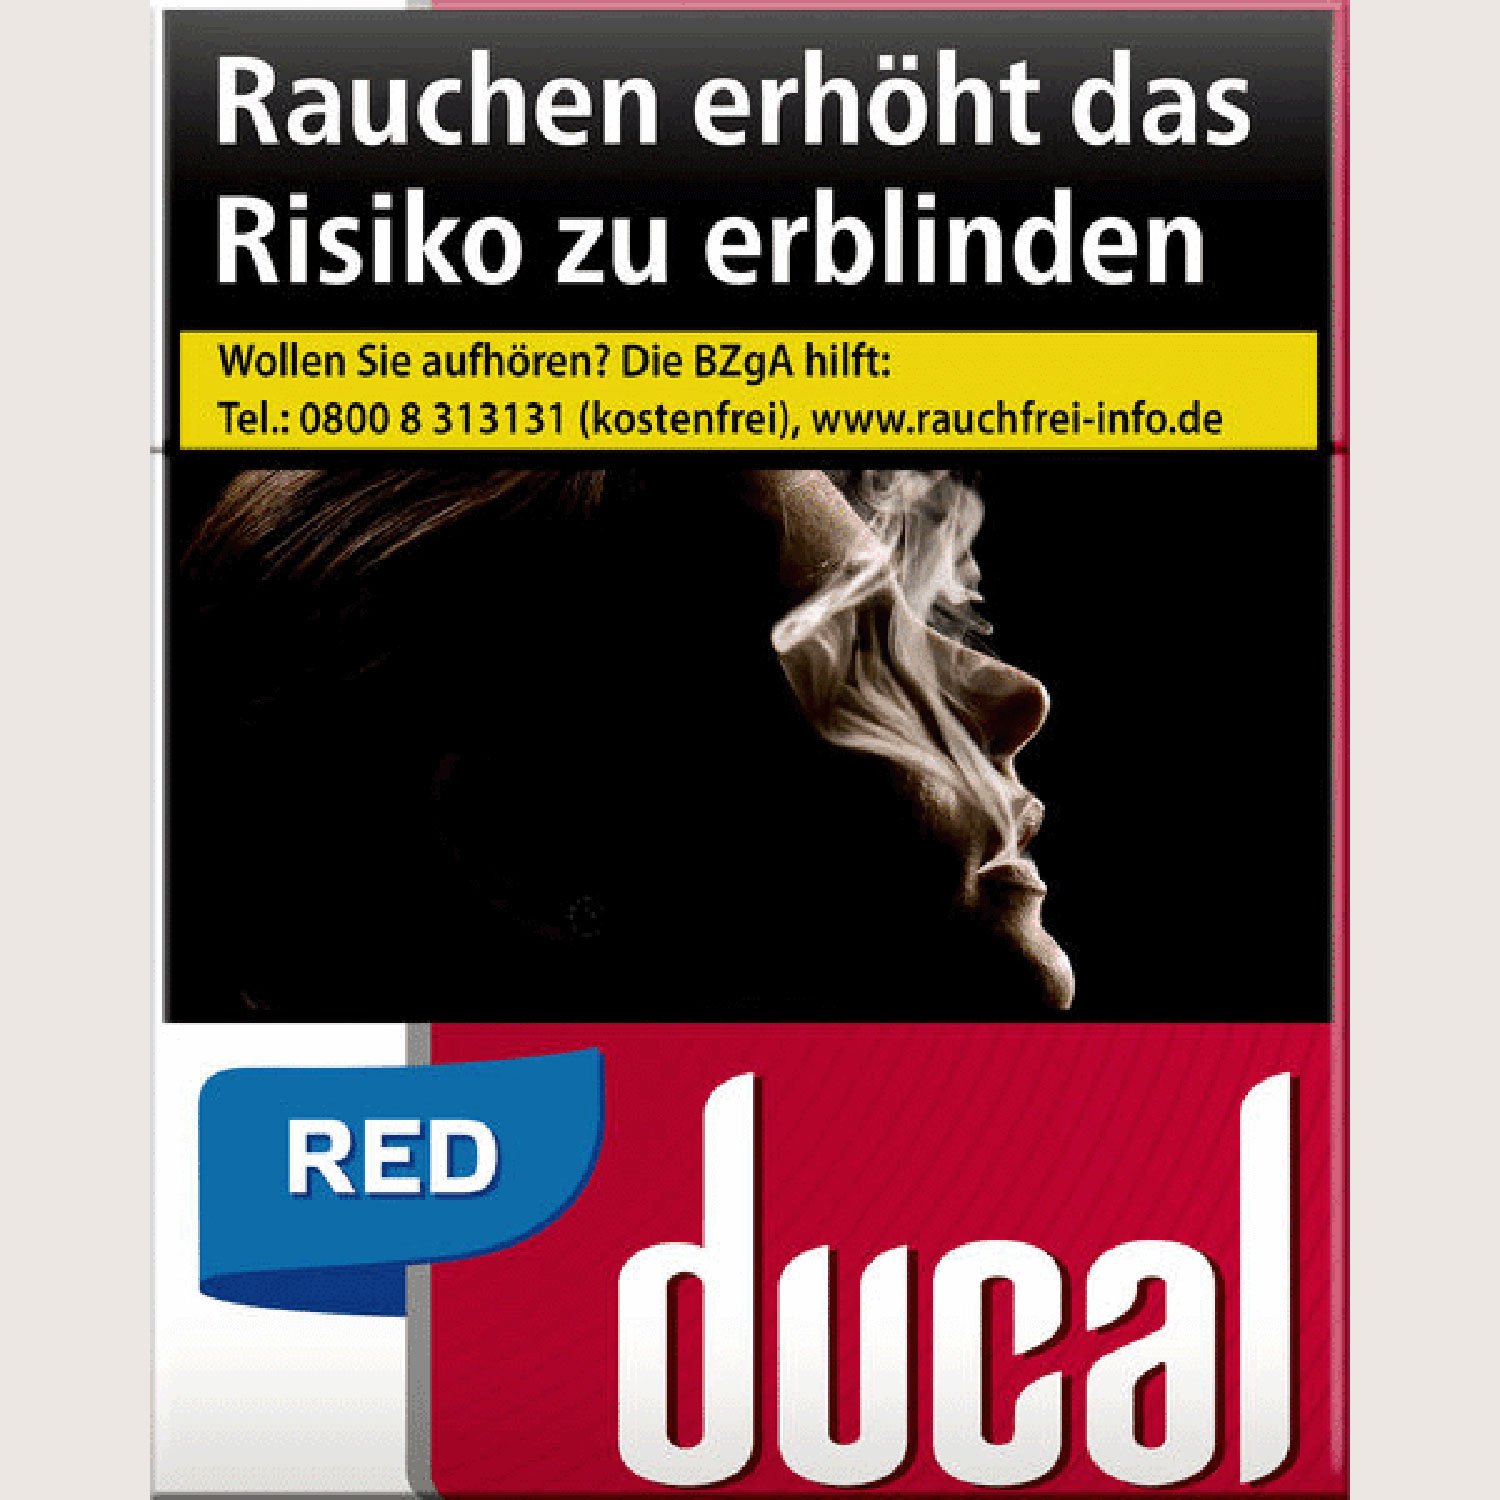 Ducal Red 9,00 €